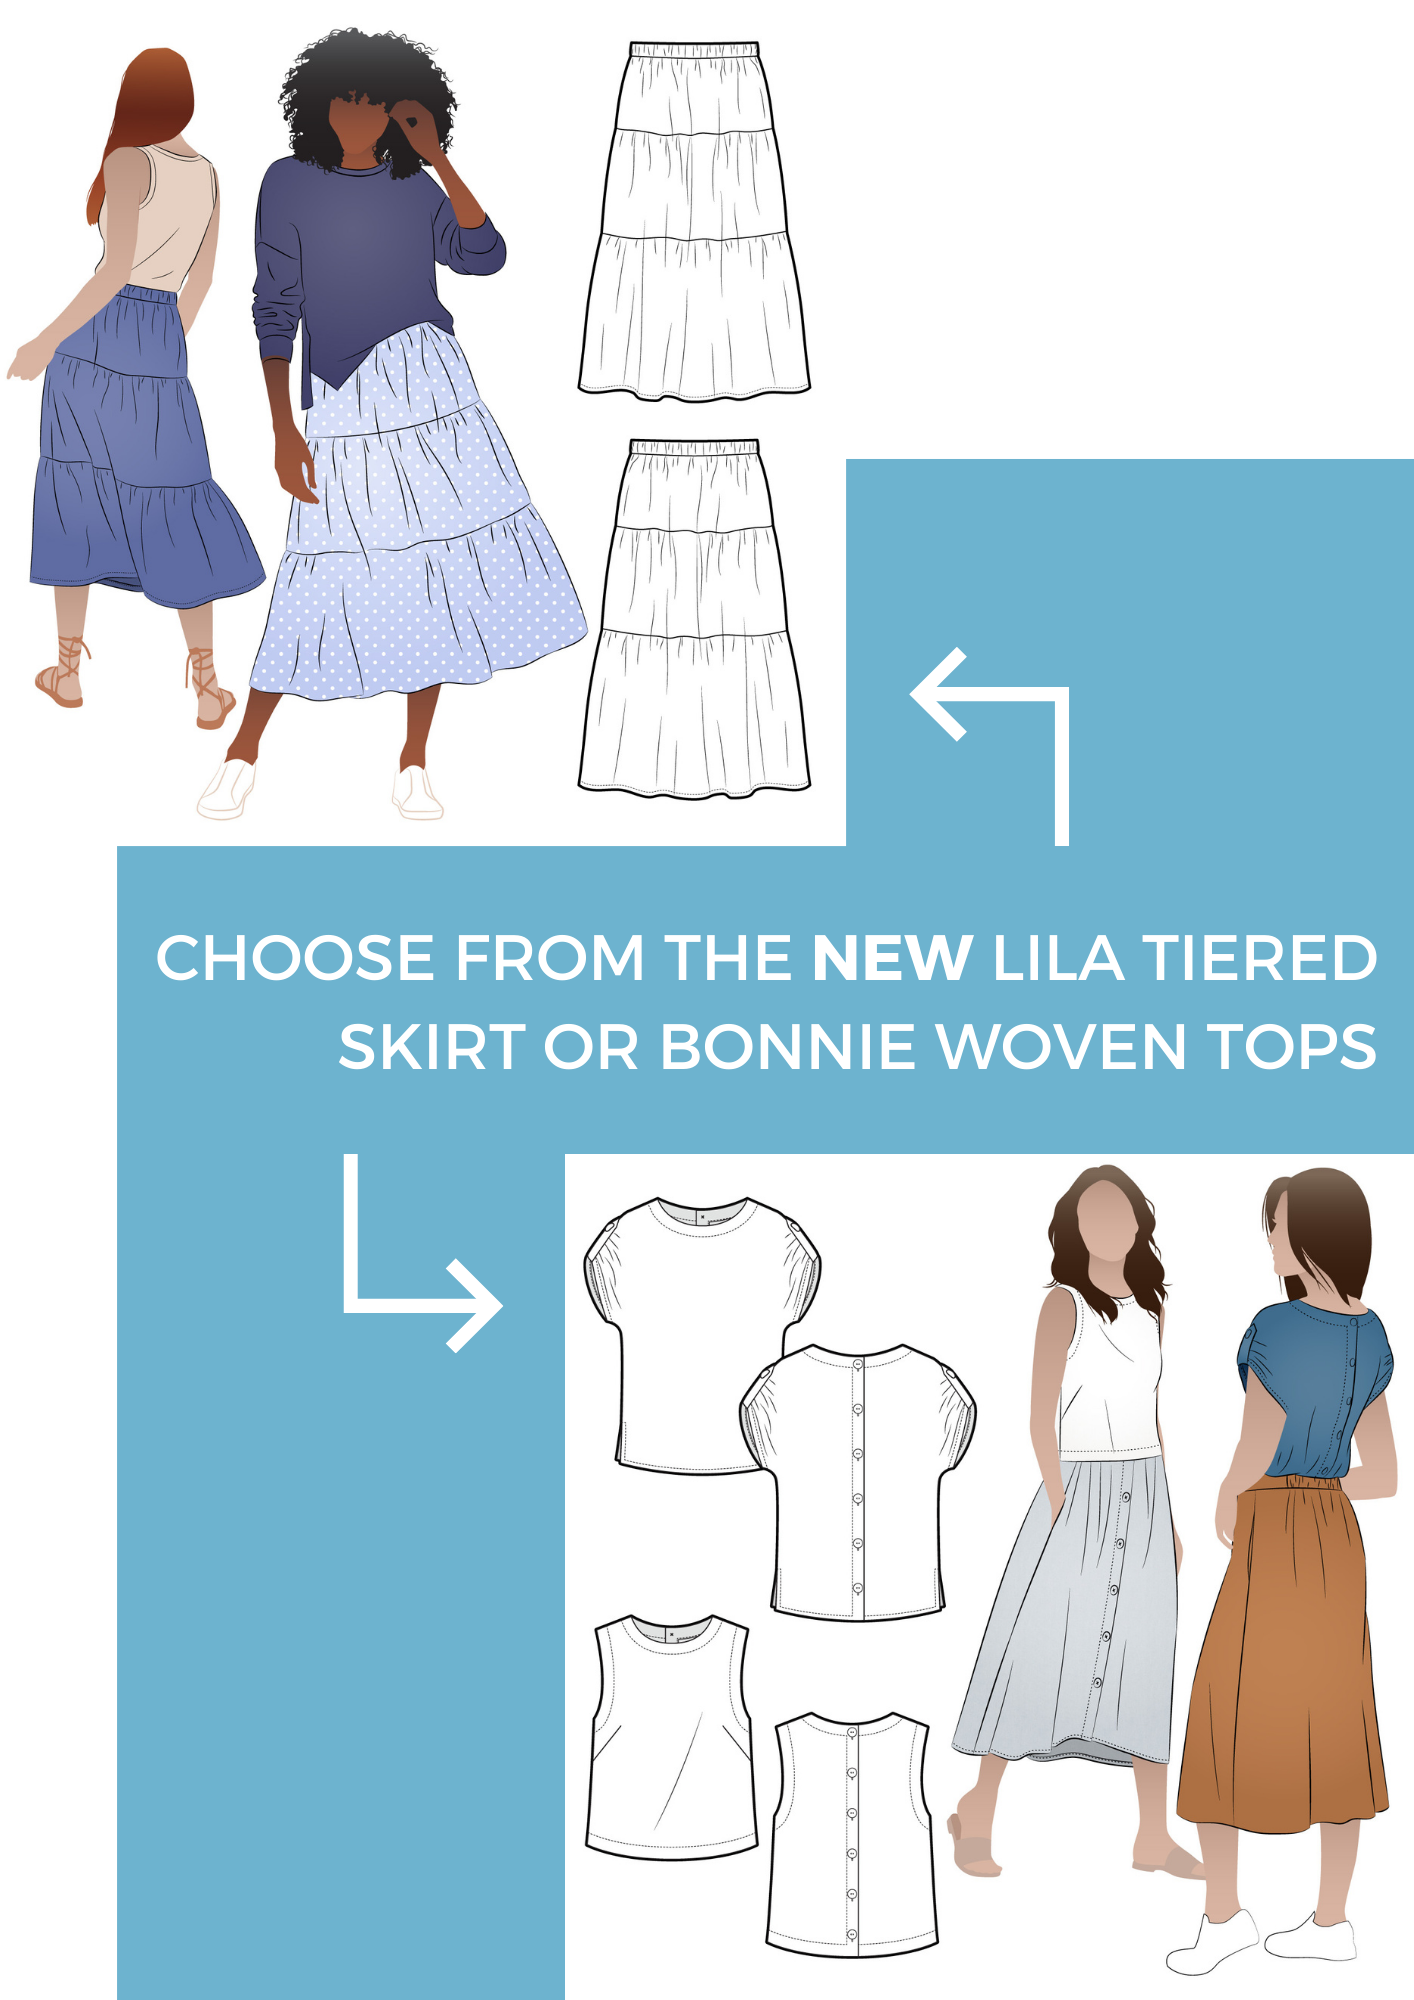 Choose from the Lila Tiered Skirt or Bonnie Woven Tops